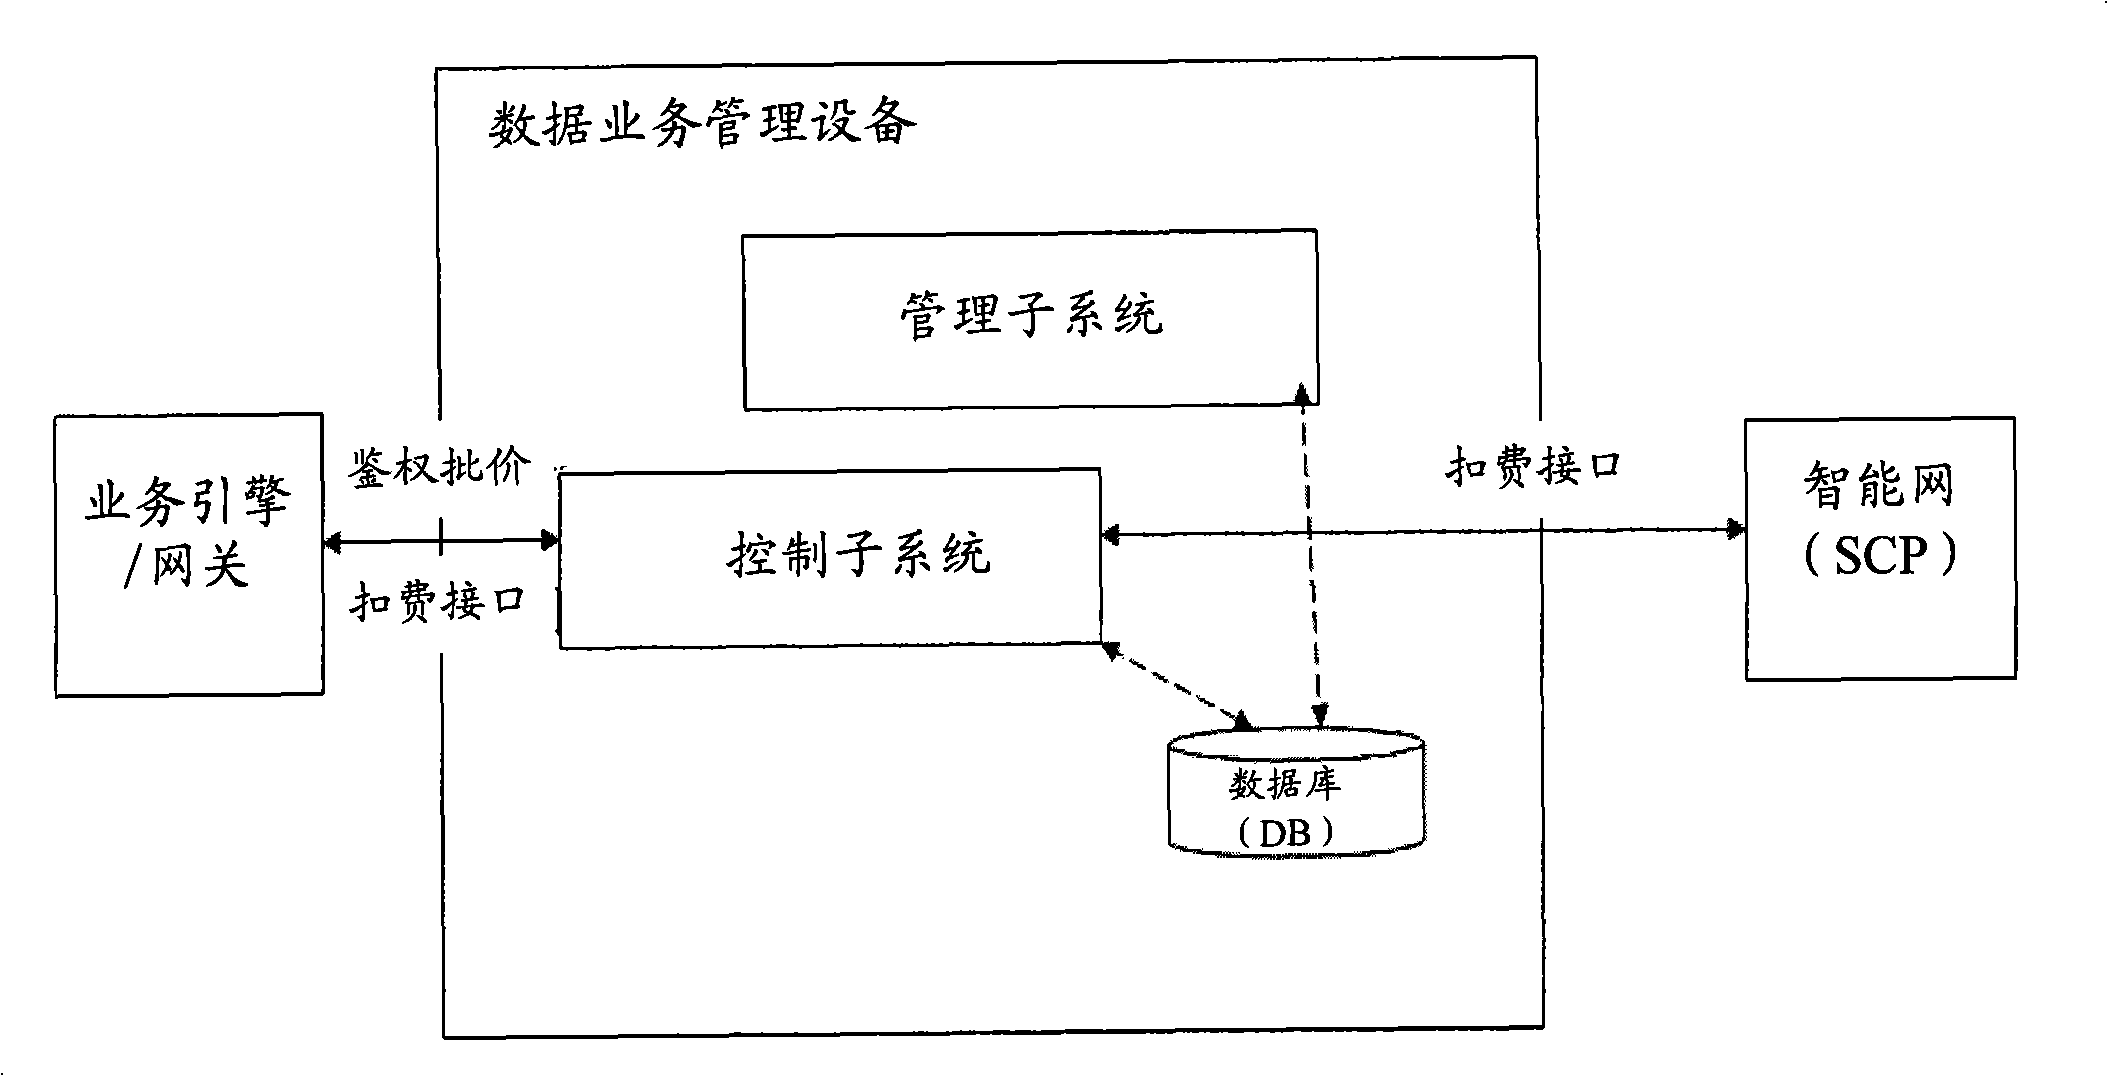 Method and system for charging data presentation business, and data business management equipment